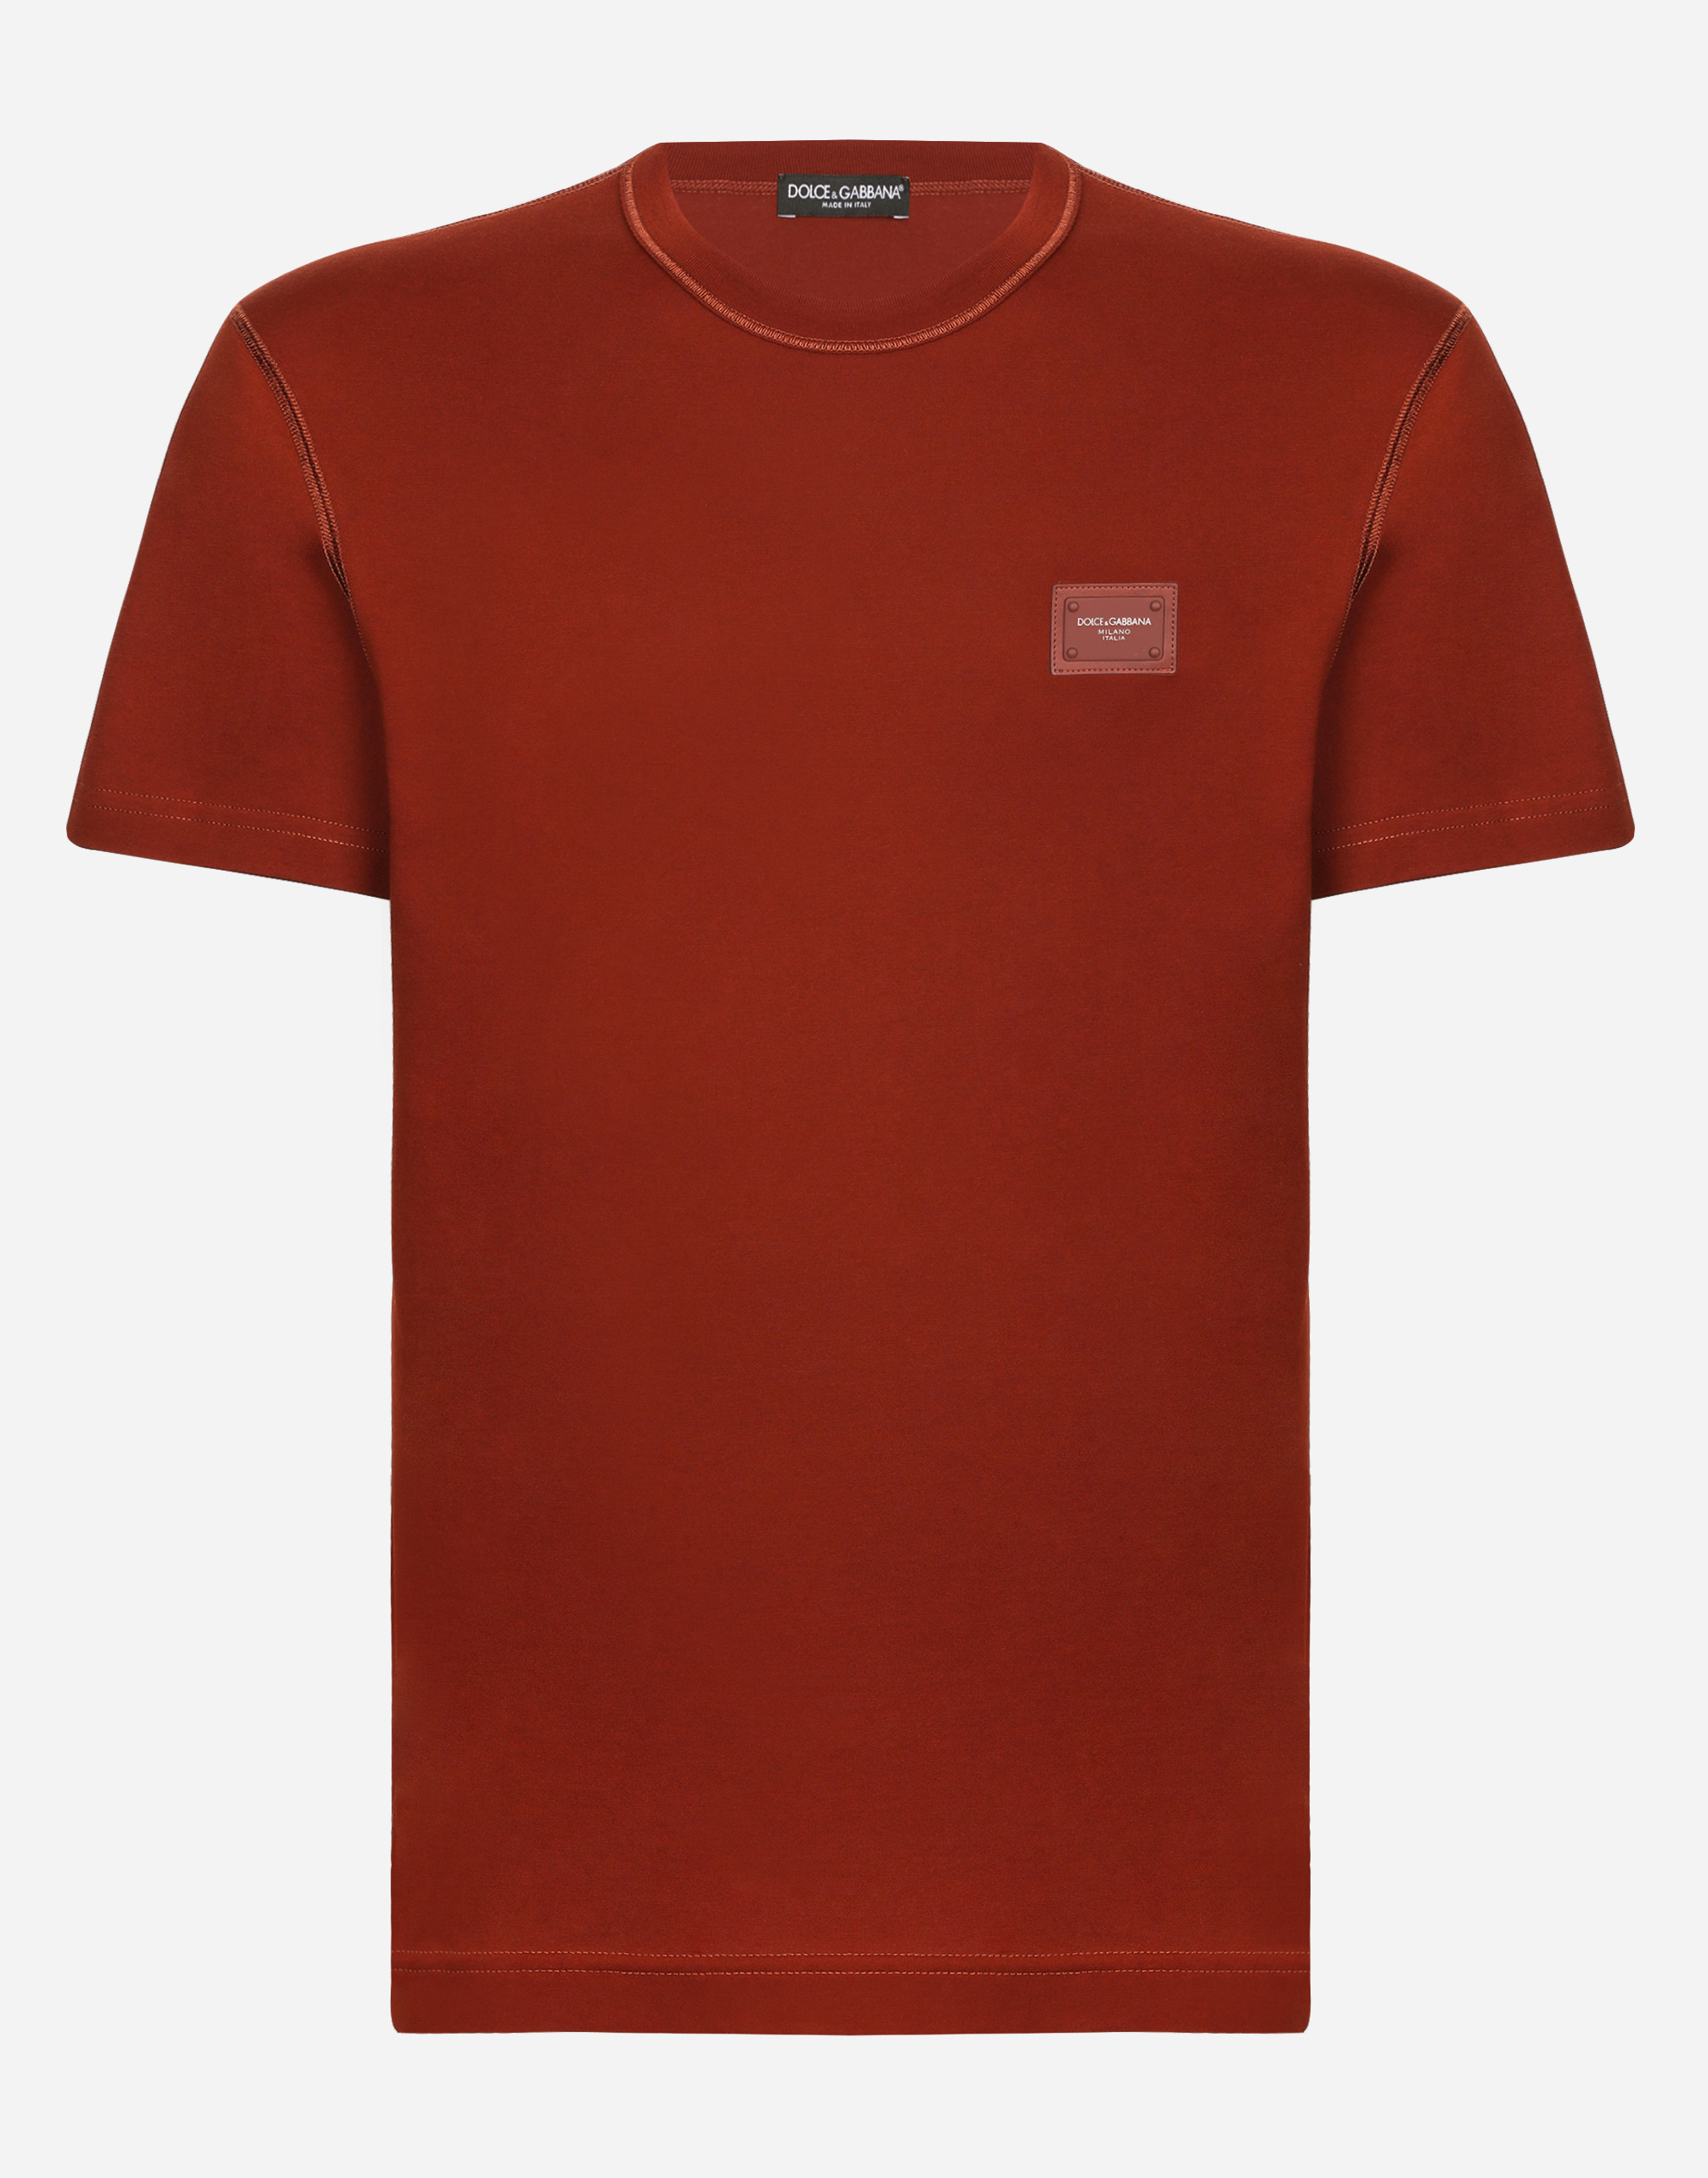 Cotton V-neck T-shirt with branded plate in Copper